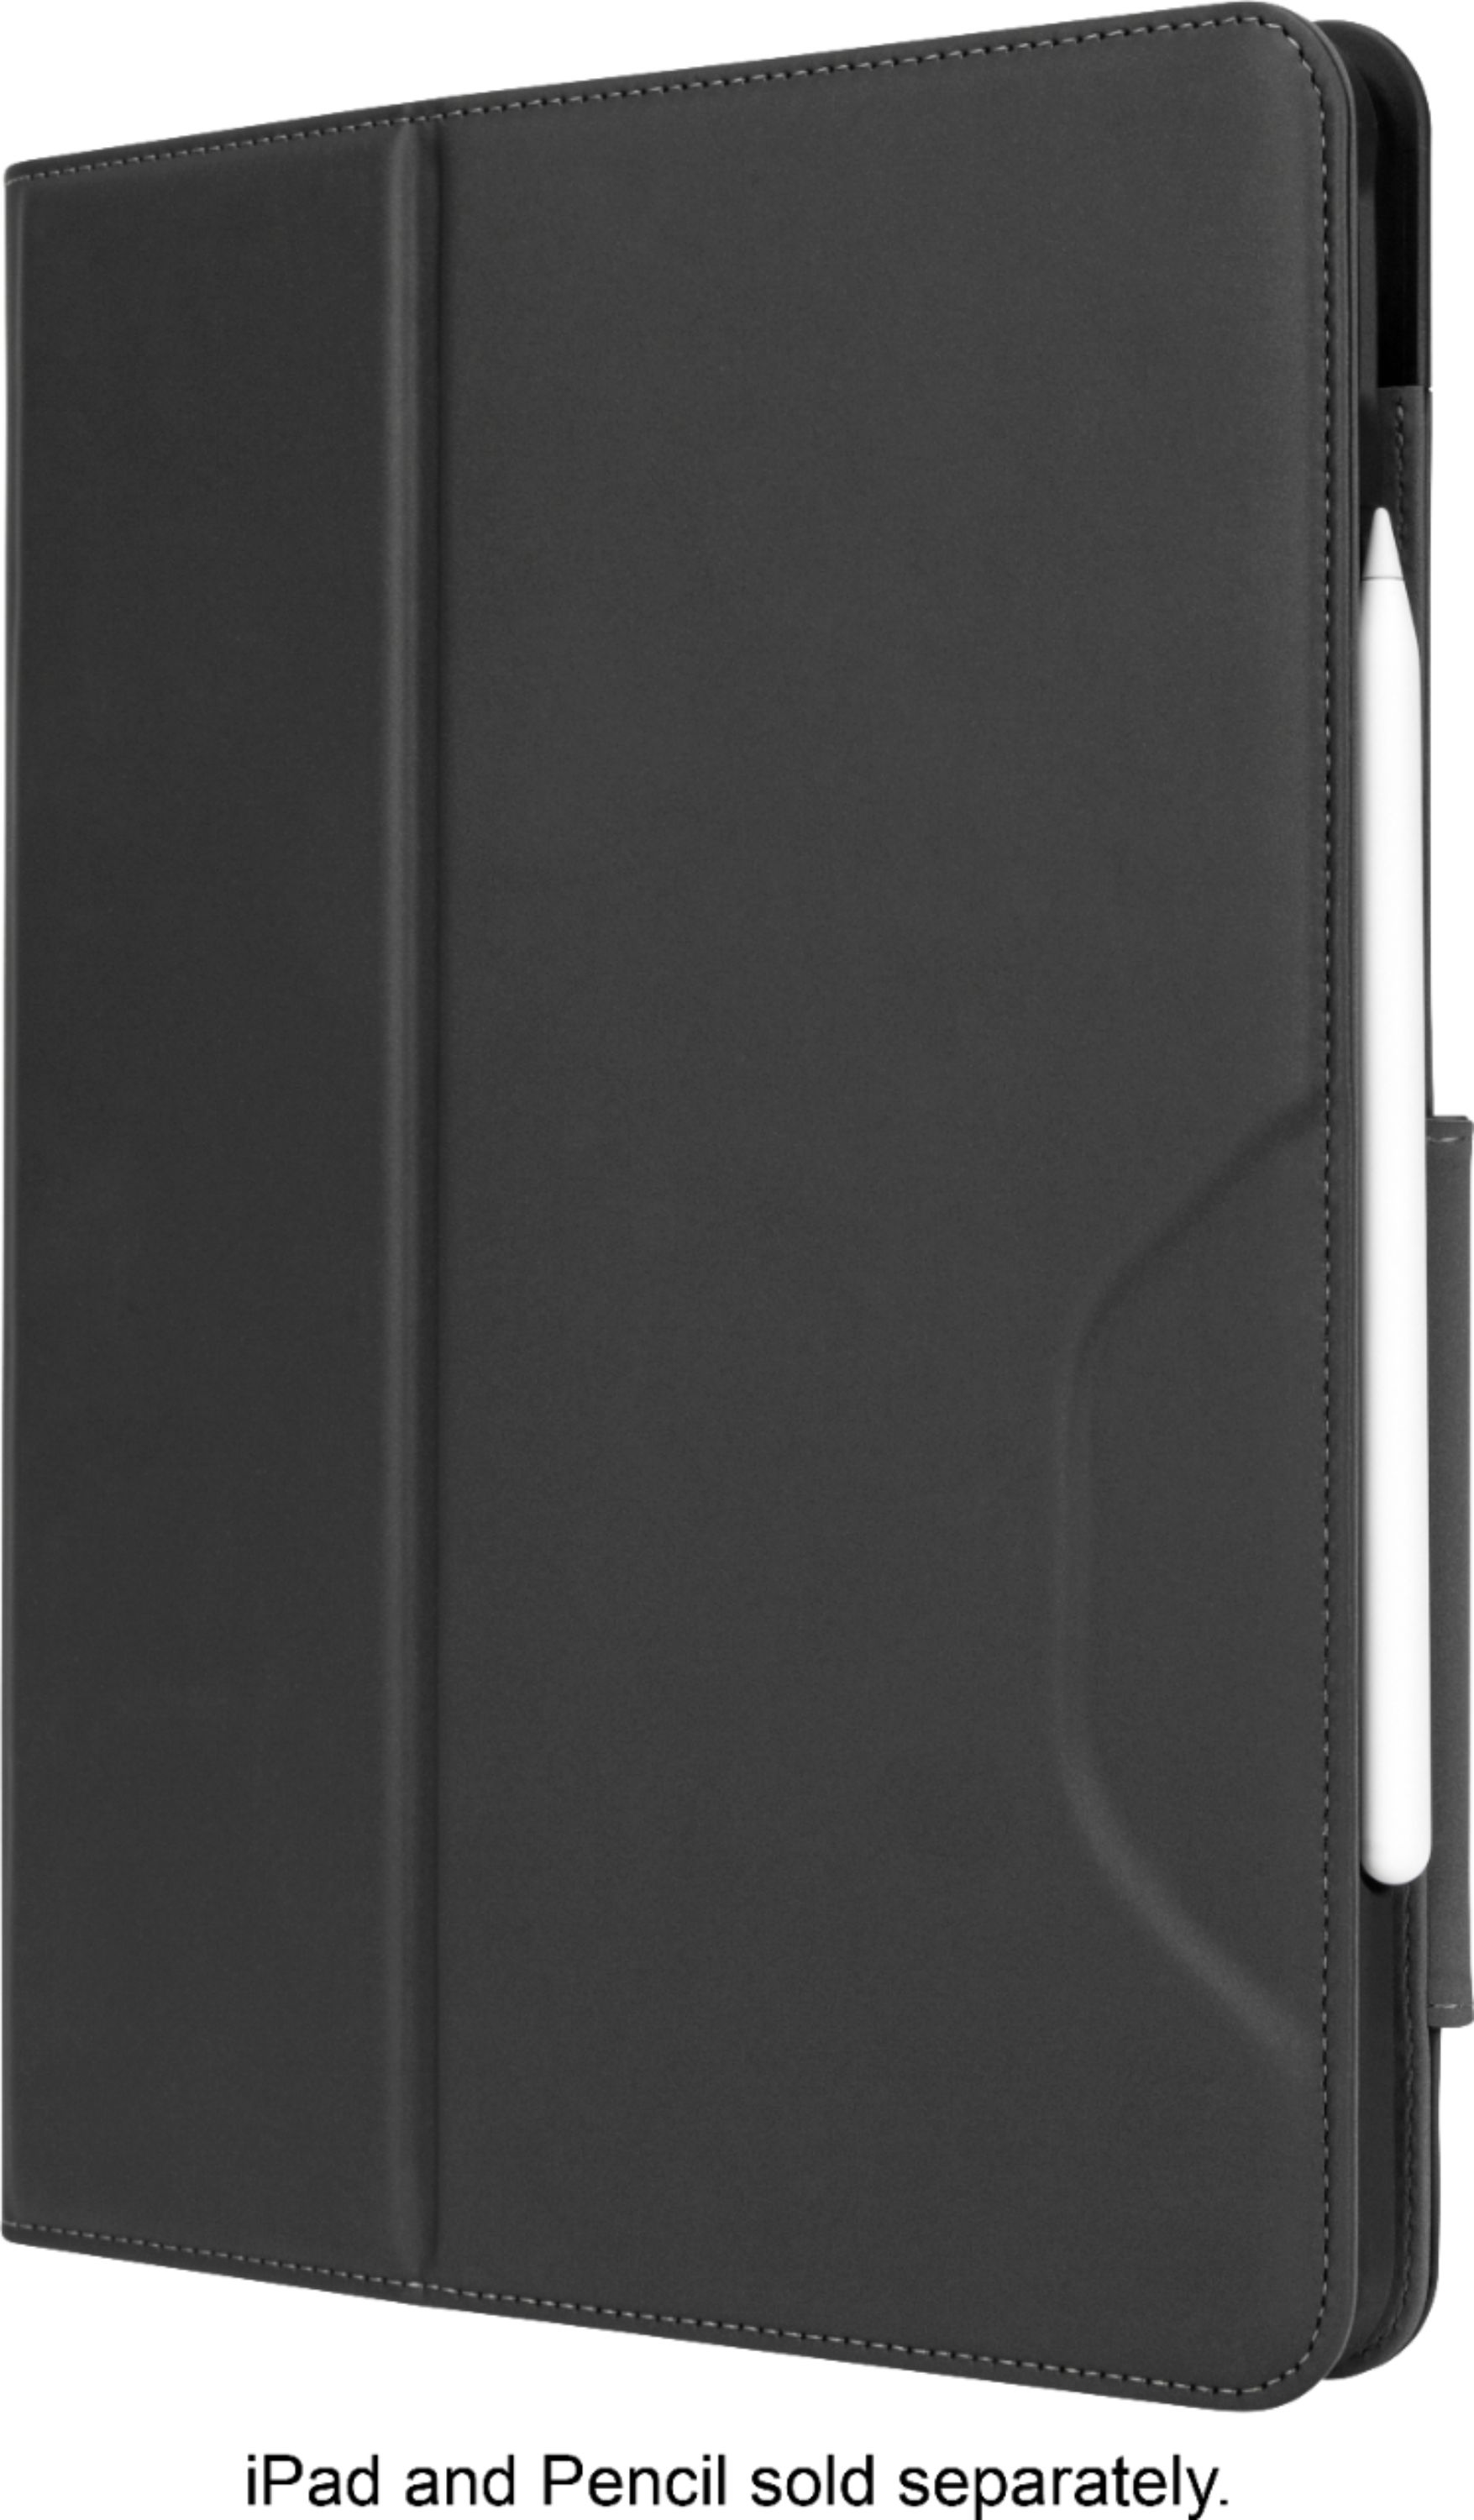 VersaVu® Classic Case for iPad Pro® (6th, 5th, 4th, and 3rd gen.) 12.9-inch